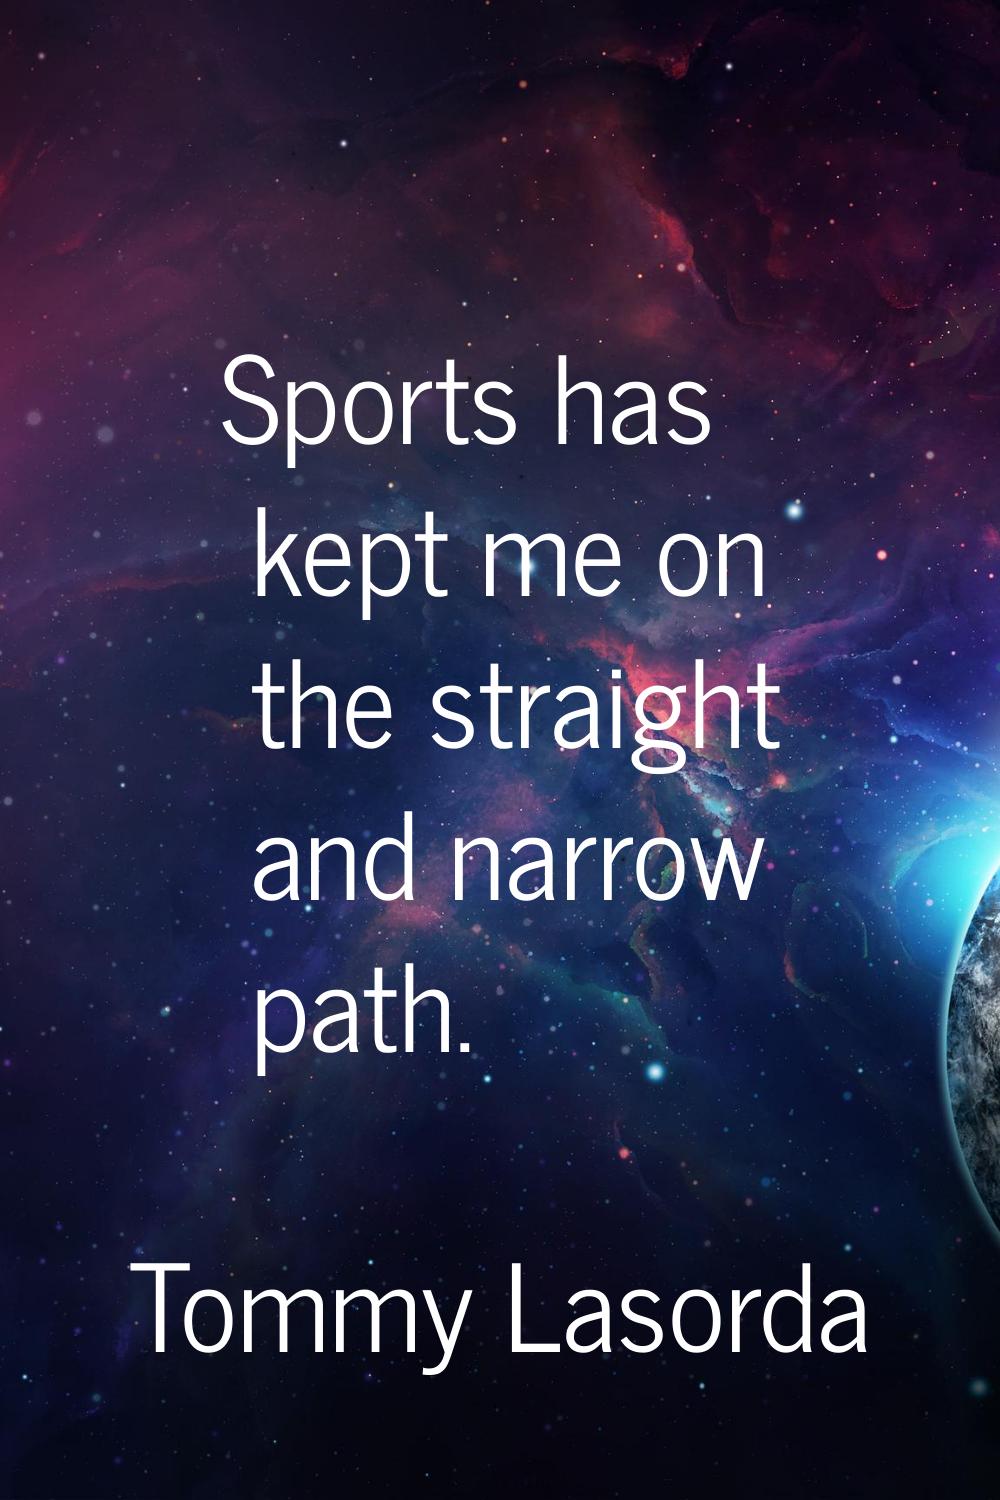 Sports has kept me on the straight and narrow path.